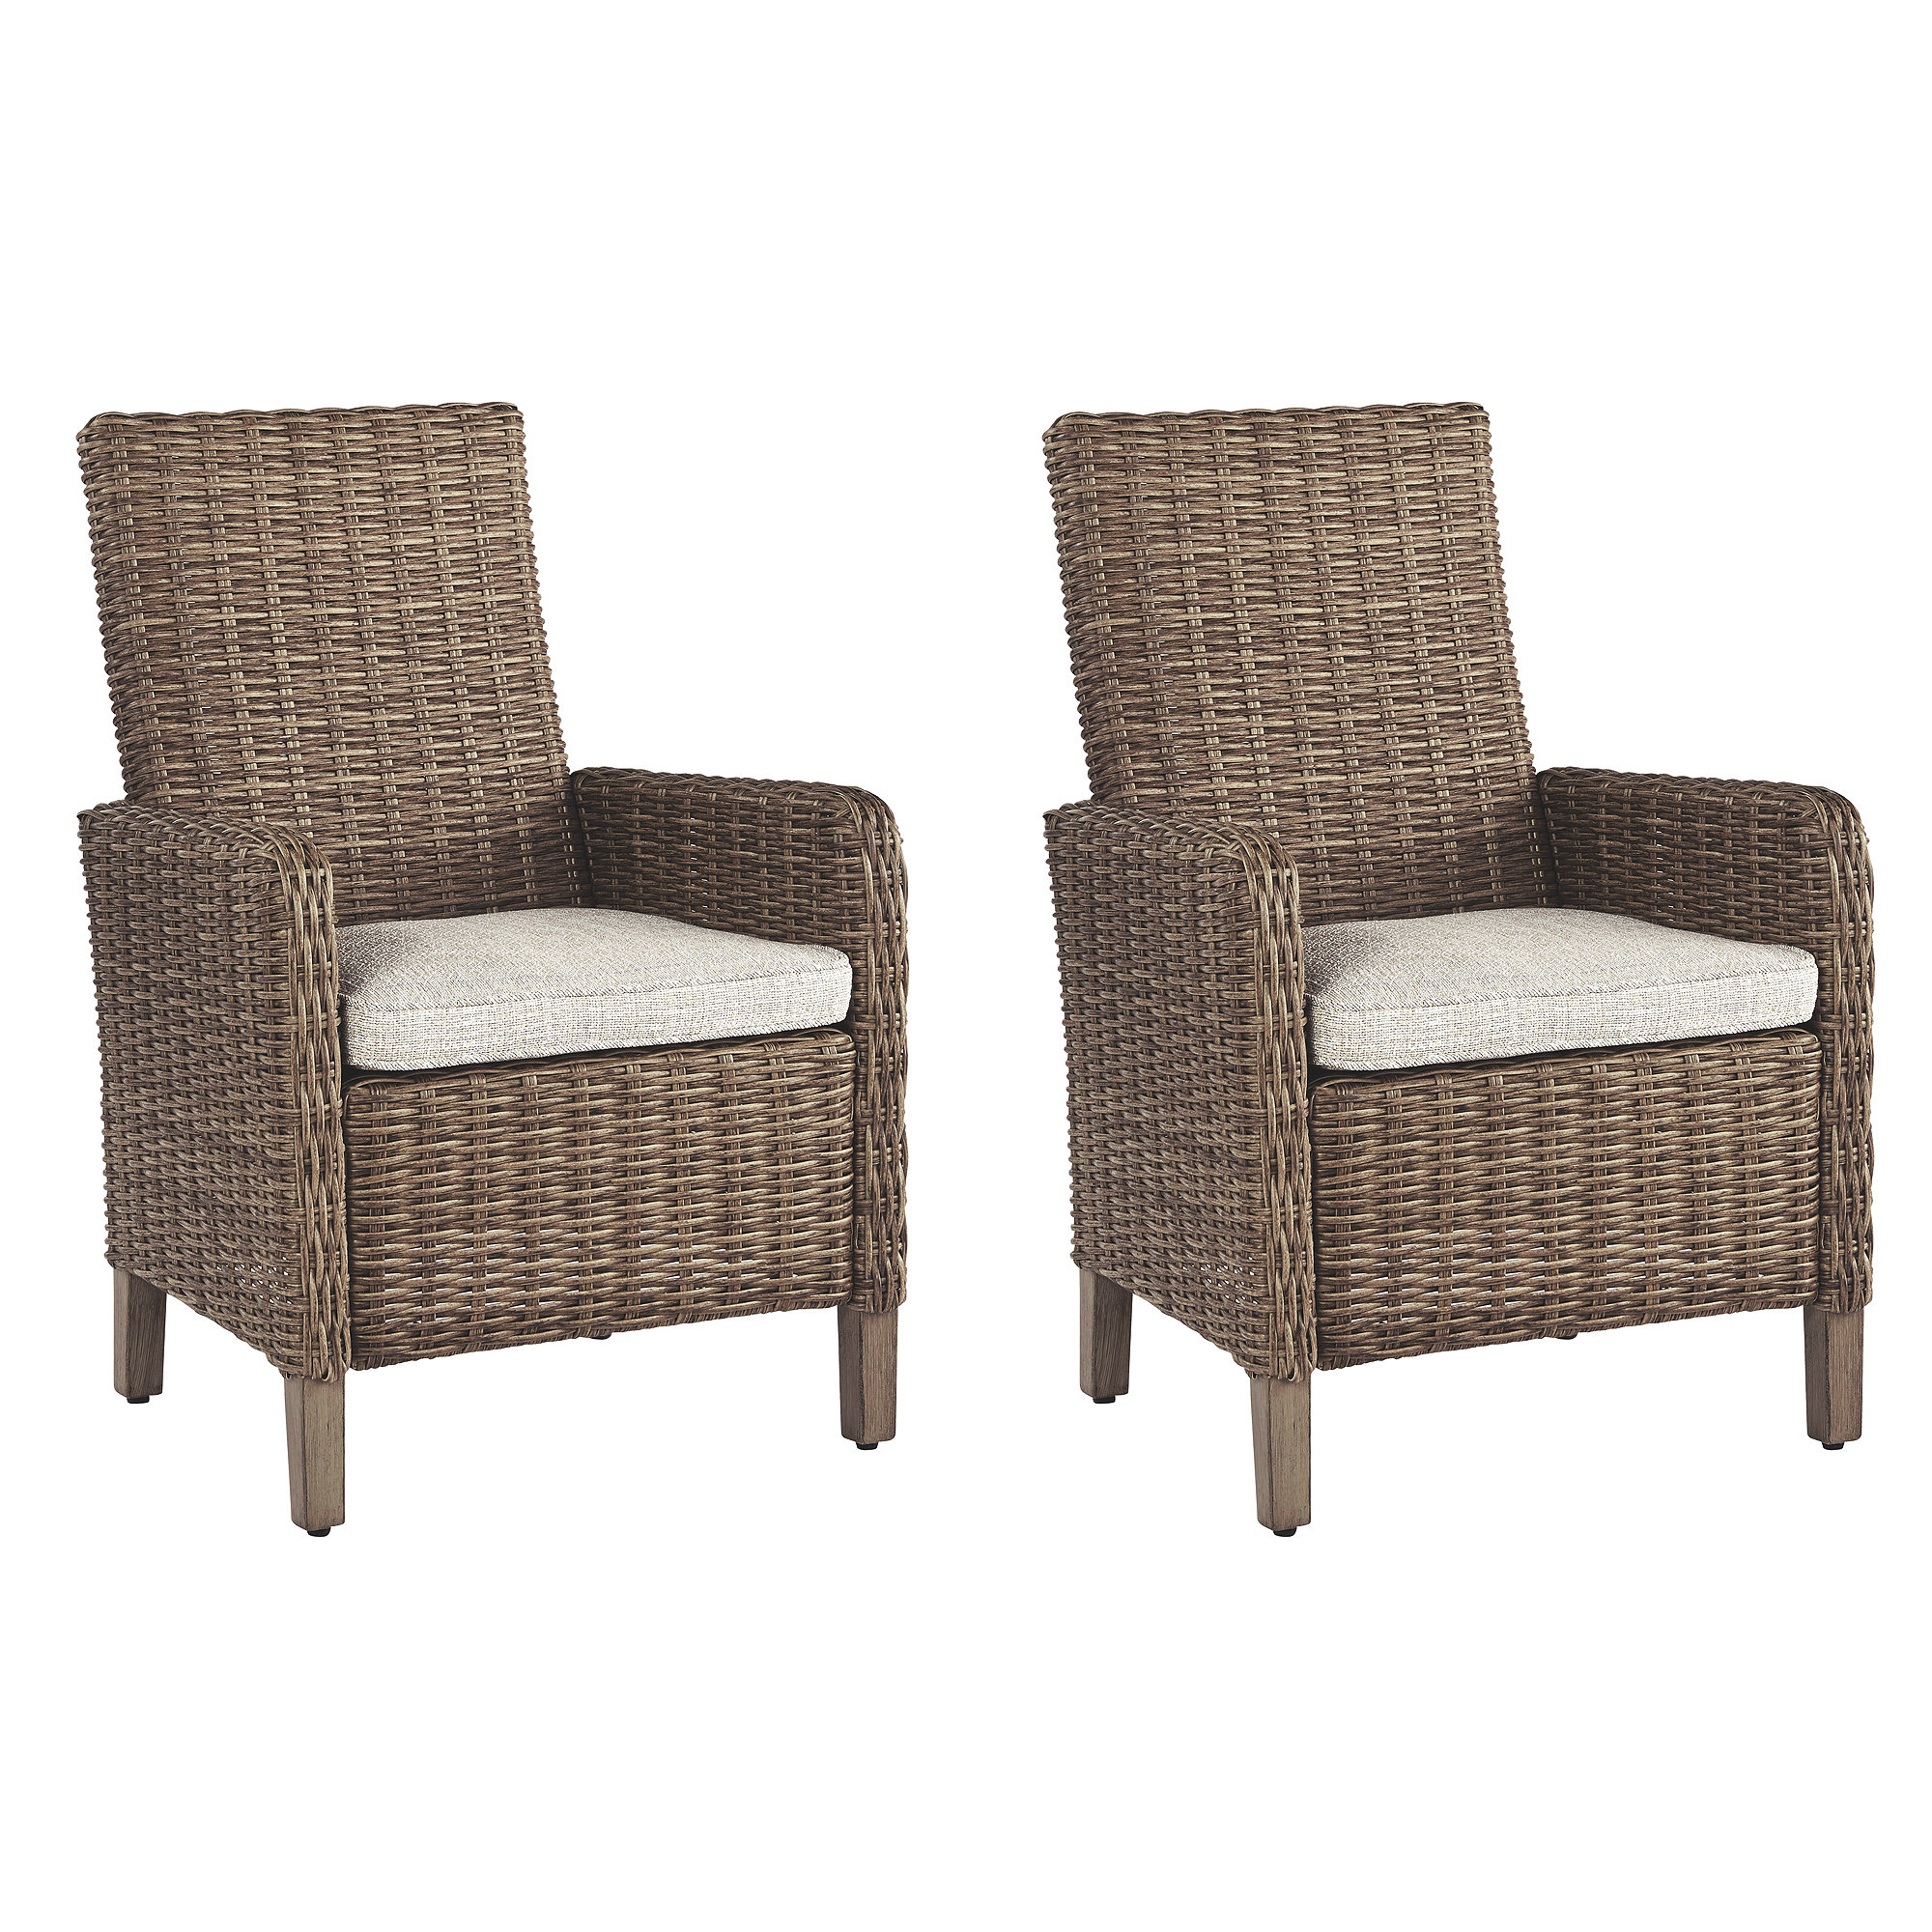 Signature Design by Ashley Casual Beachcroft Arm Chair with Cushion, Set of 2, Beige - image 1 of 4